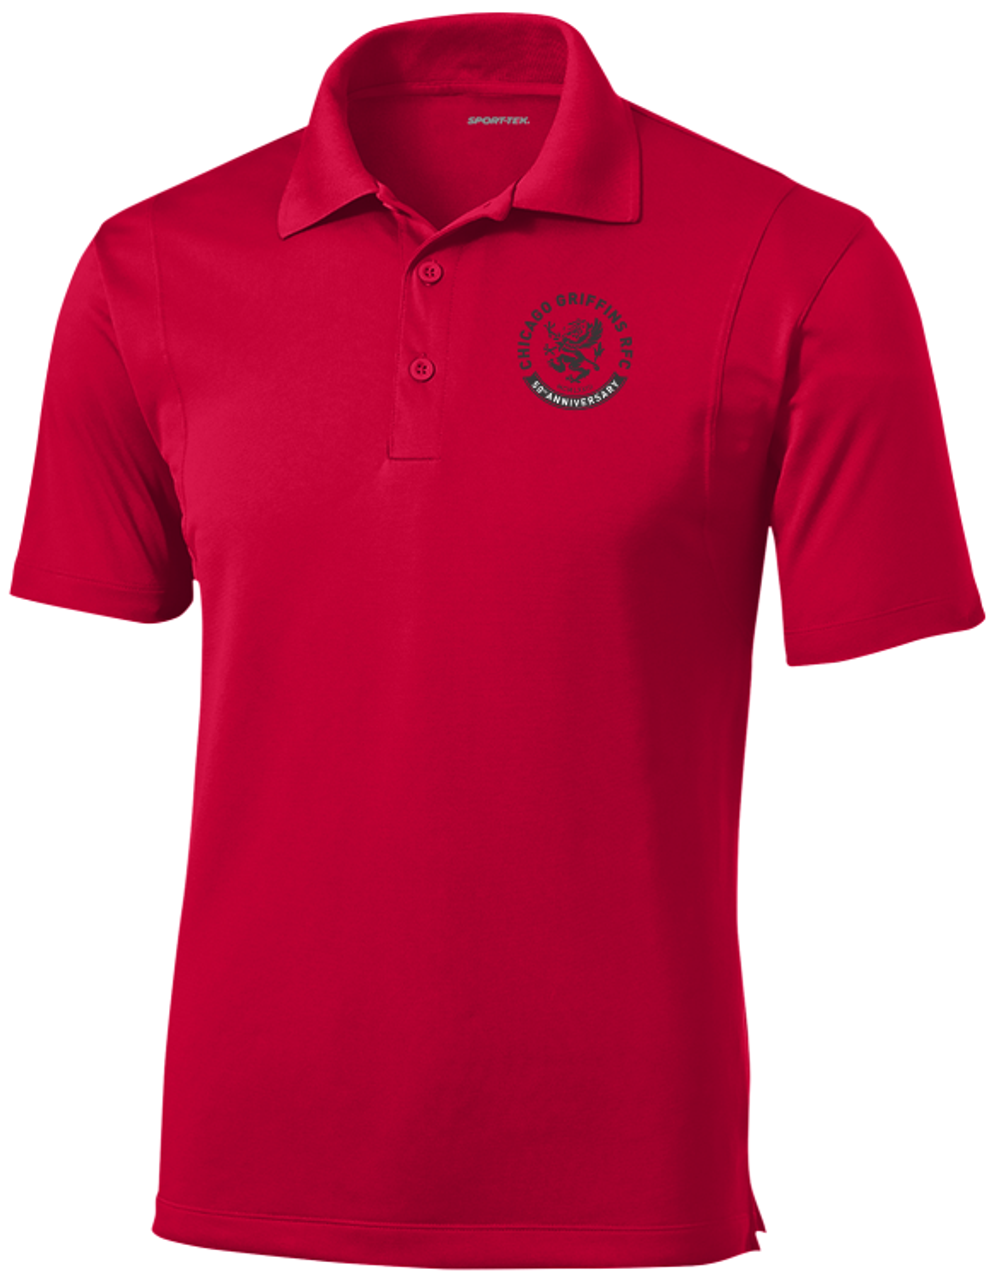 Chicago Griffins 50th Anniversary Polo